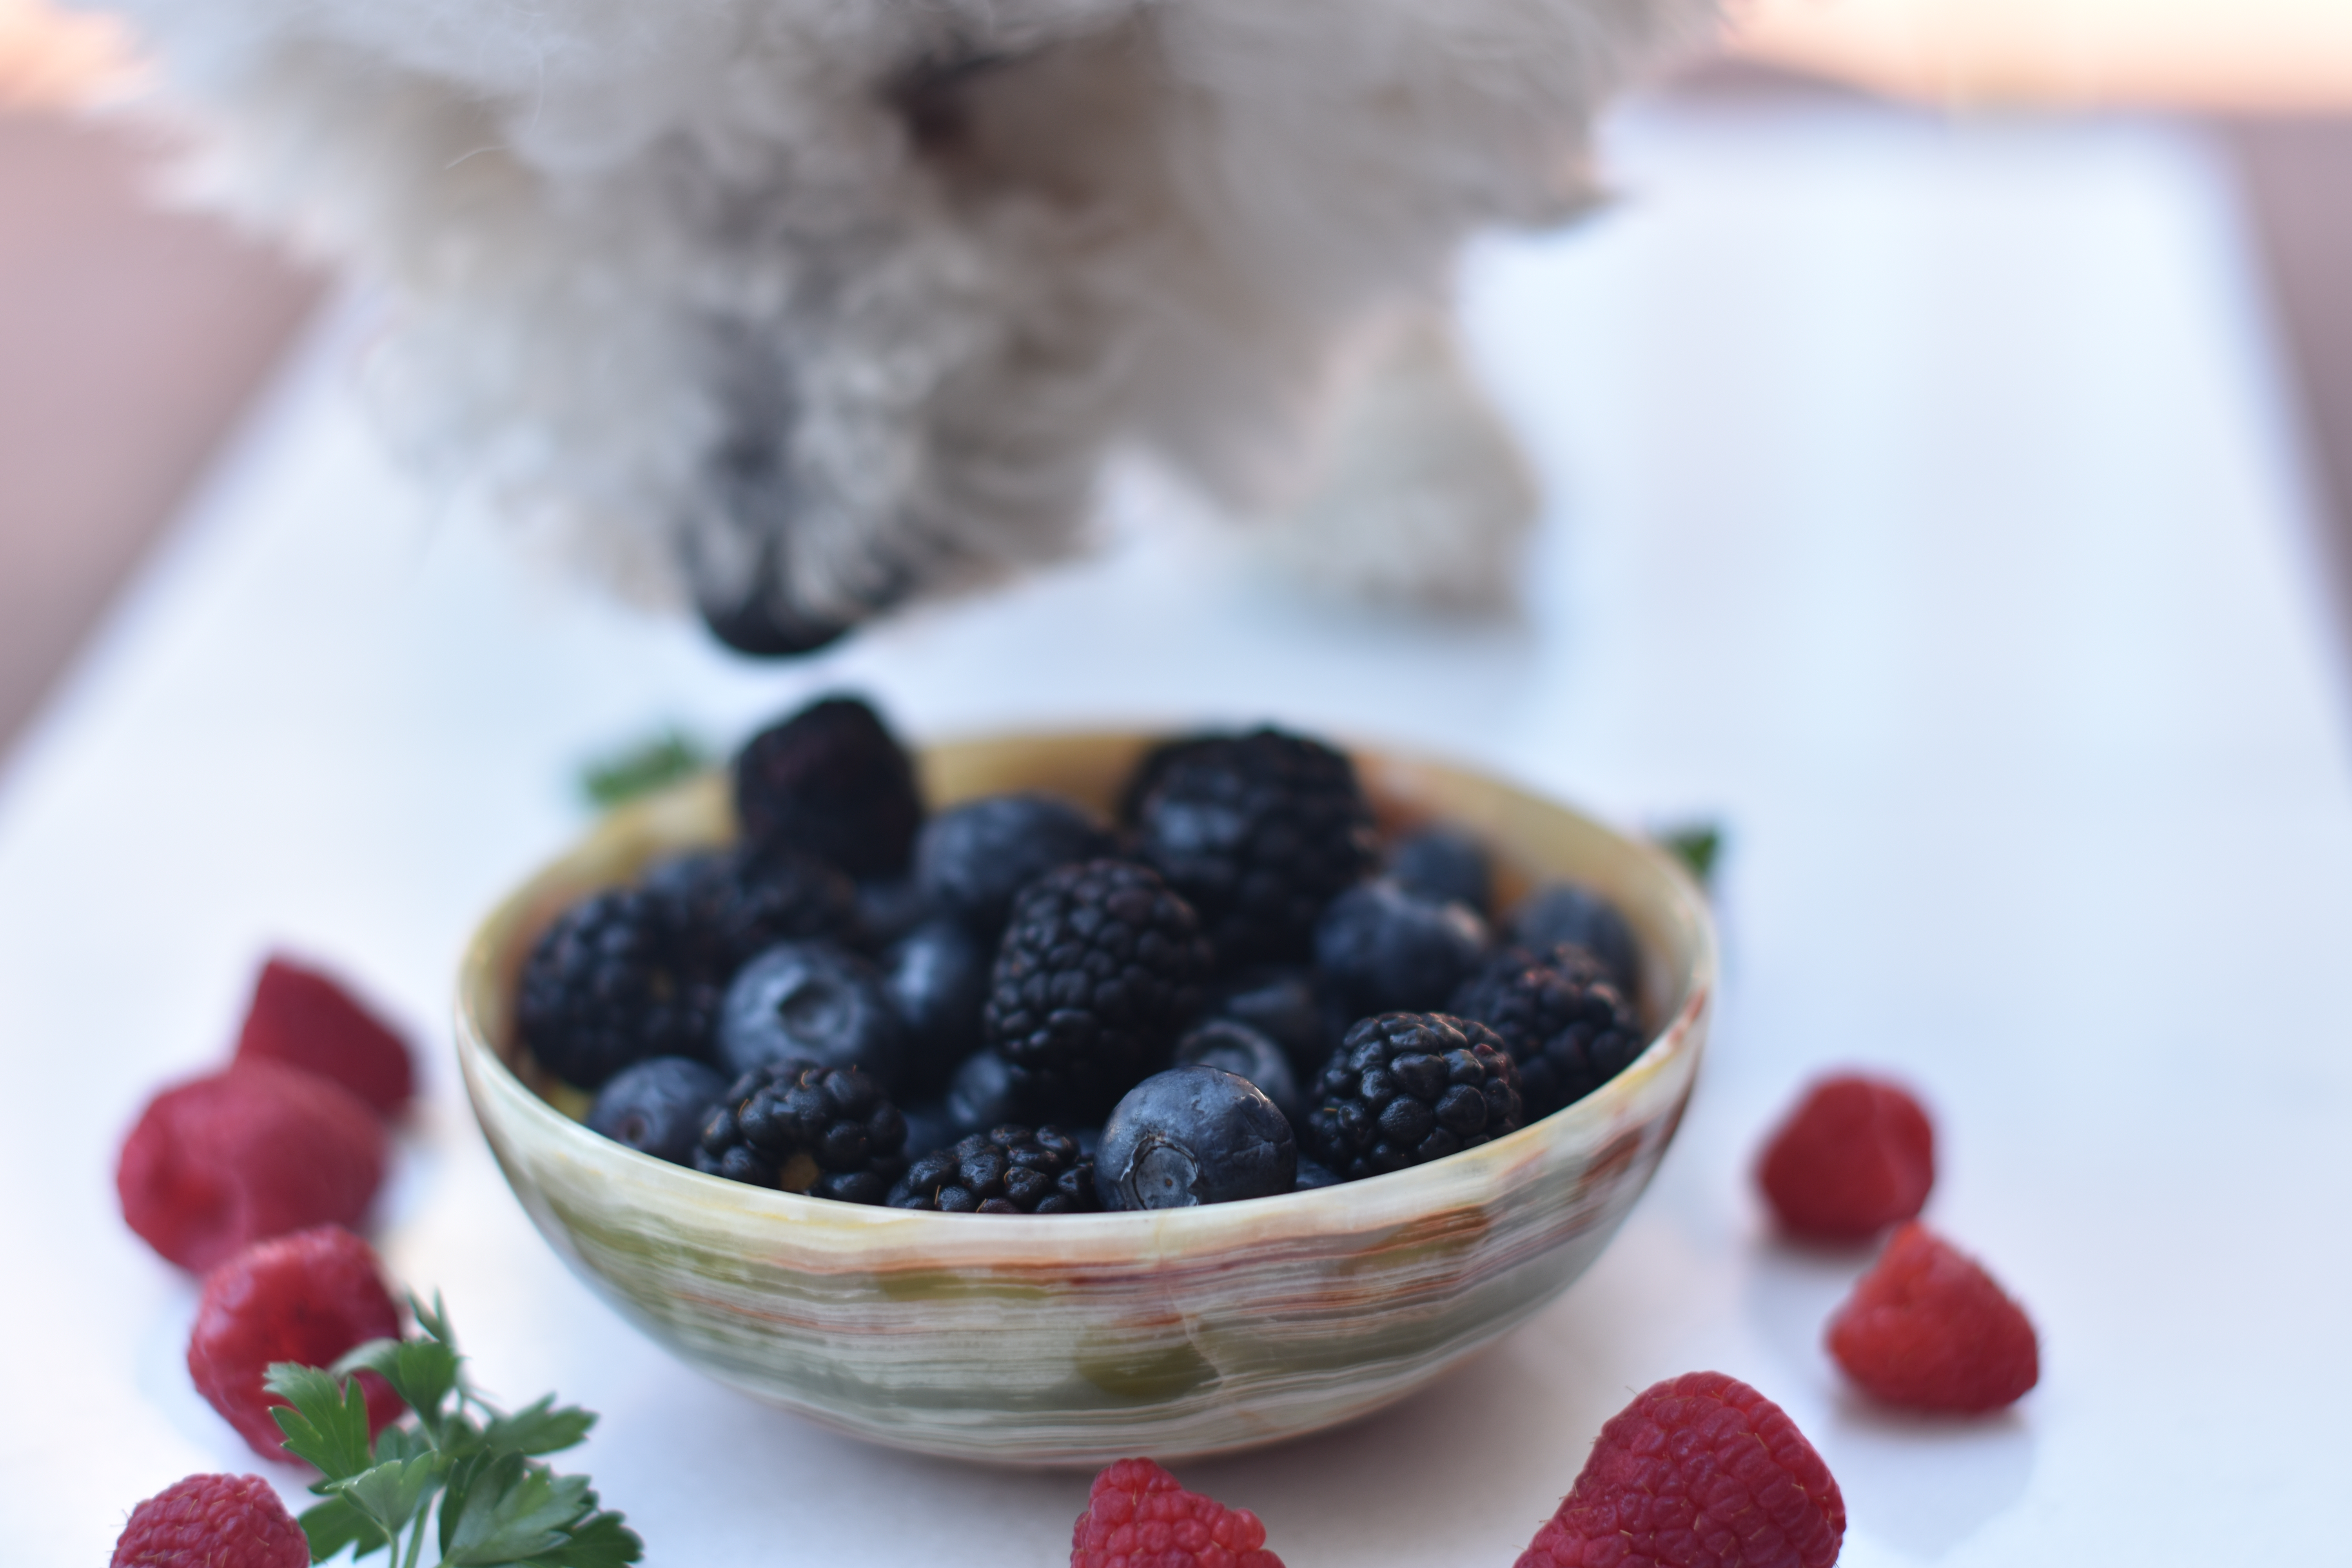 Bichon Frise and Berries